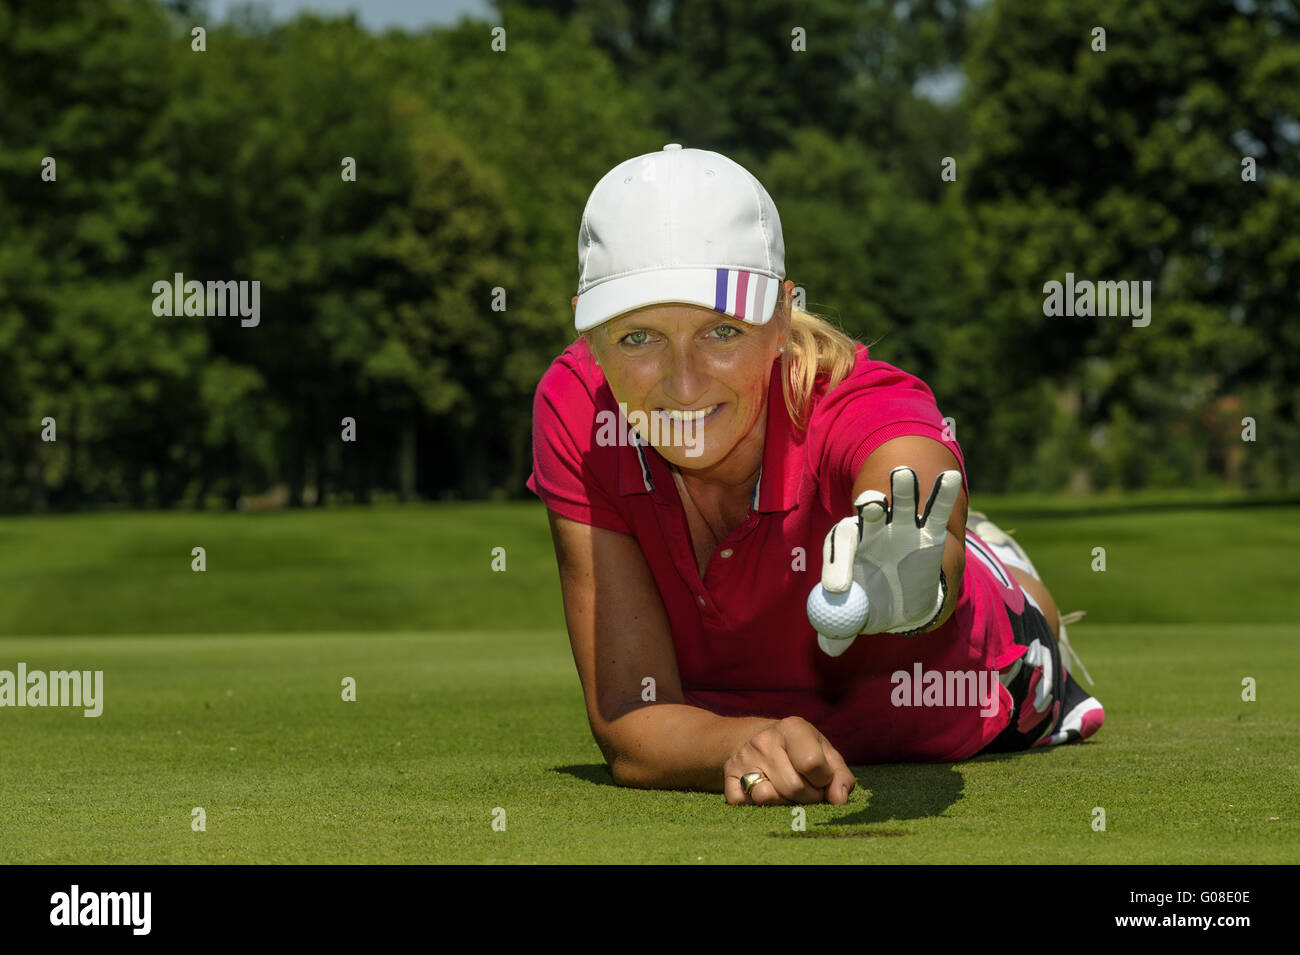 Golfer holding a golf ball with his hand over the Stock Photo